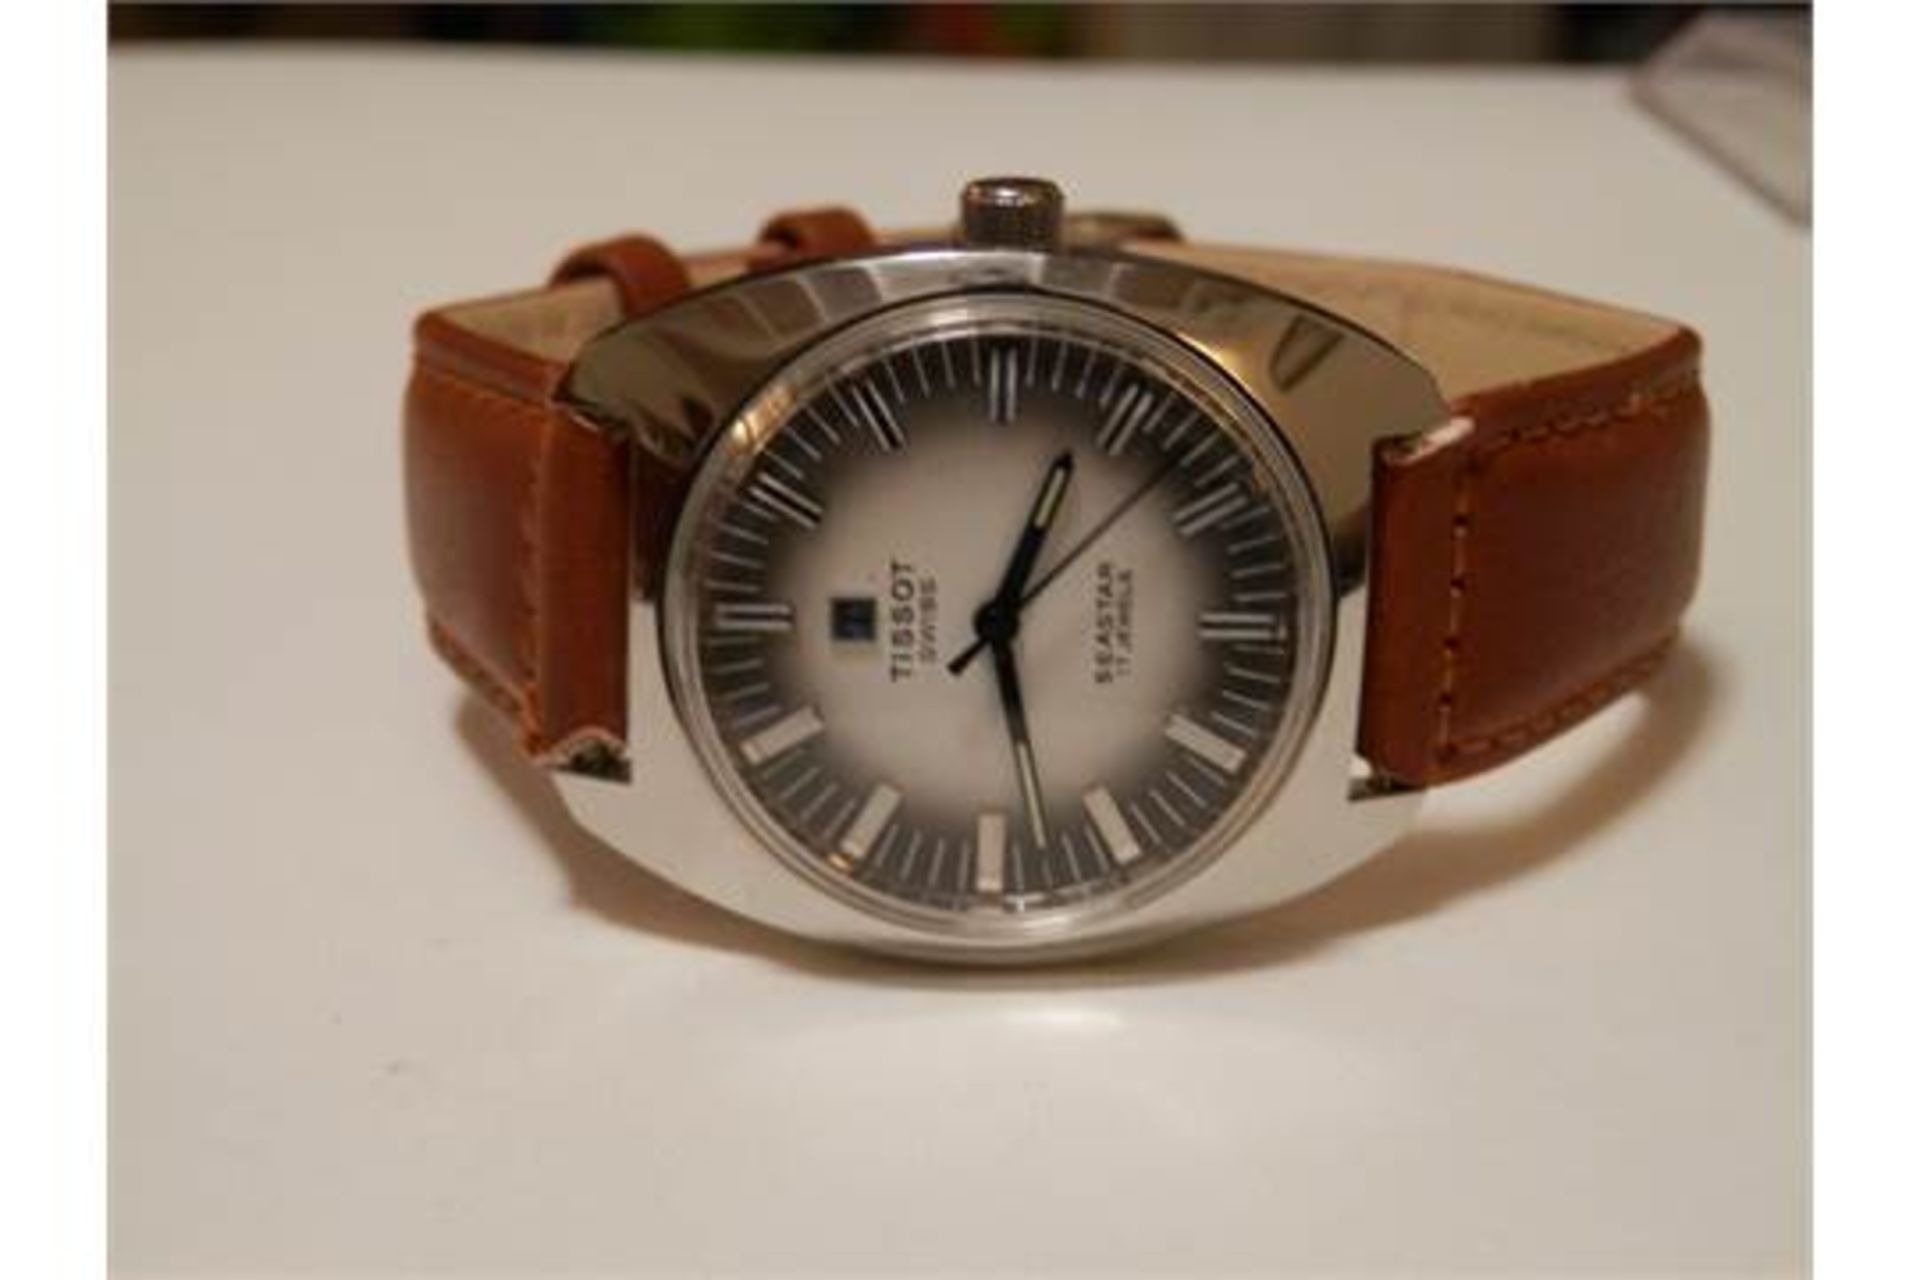 SUPERB GENTS TISSOT SEASTAR, POSSIBLY NEW/OLD STOCK 1970S 17 JEWEL SWISS WATCH (#3 of 3 available) - Image 4 of 10